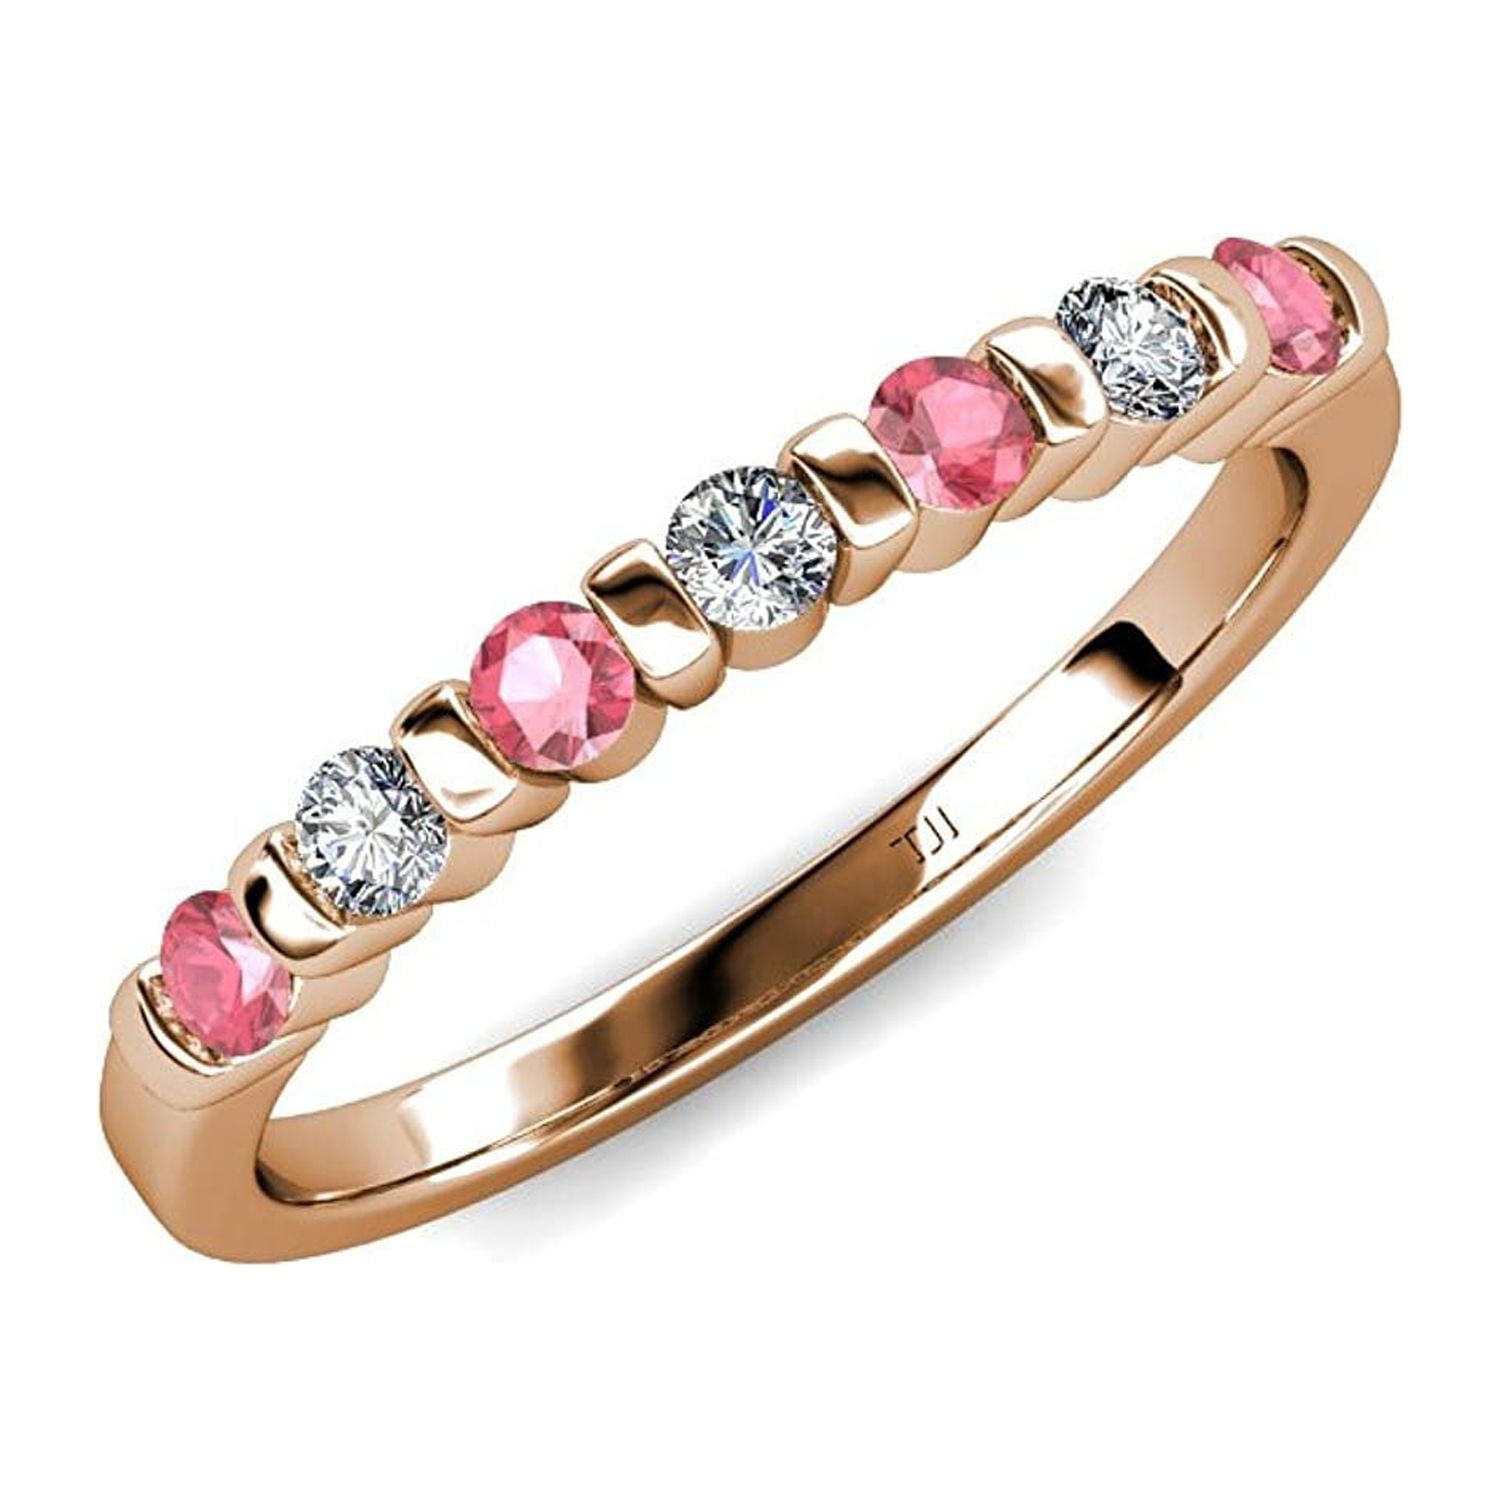 Pink Tourmaline and Diamond 7 Stone Wedding Band 0.22 ct tw in 14K Rose Gold.size 3.5